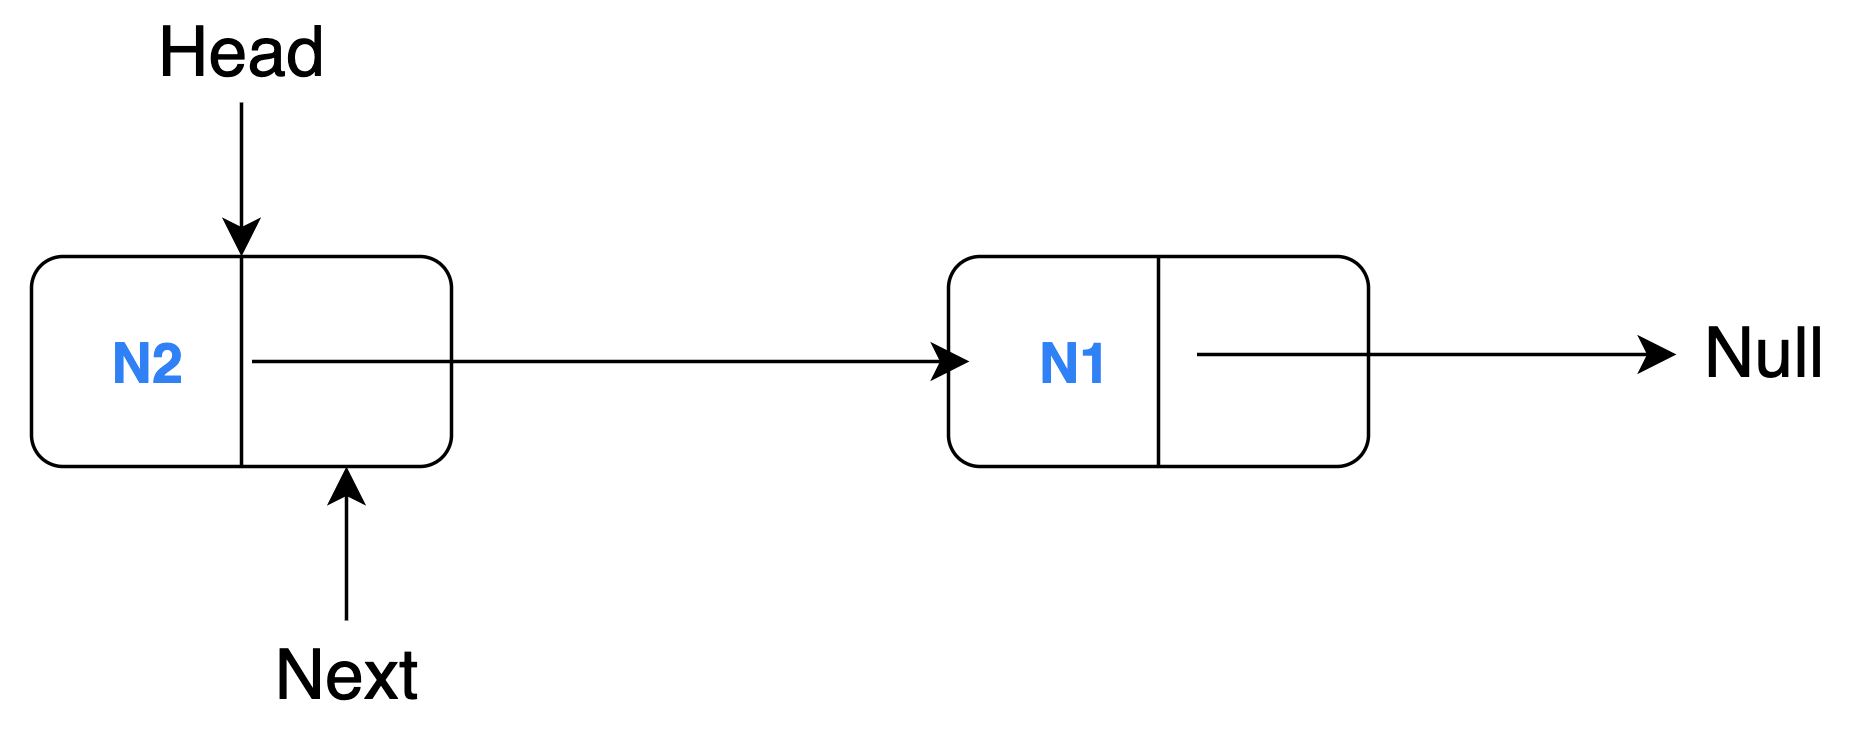 Linked list in the target model